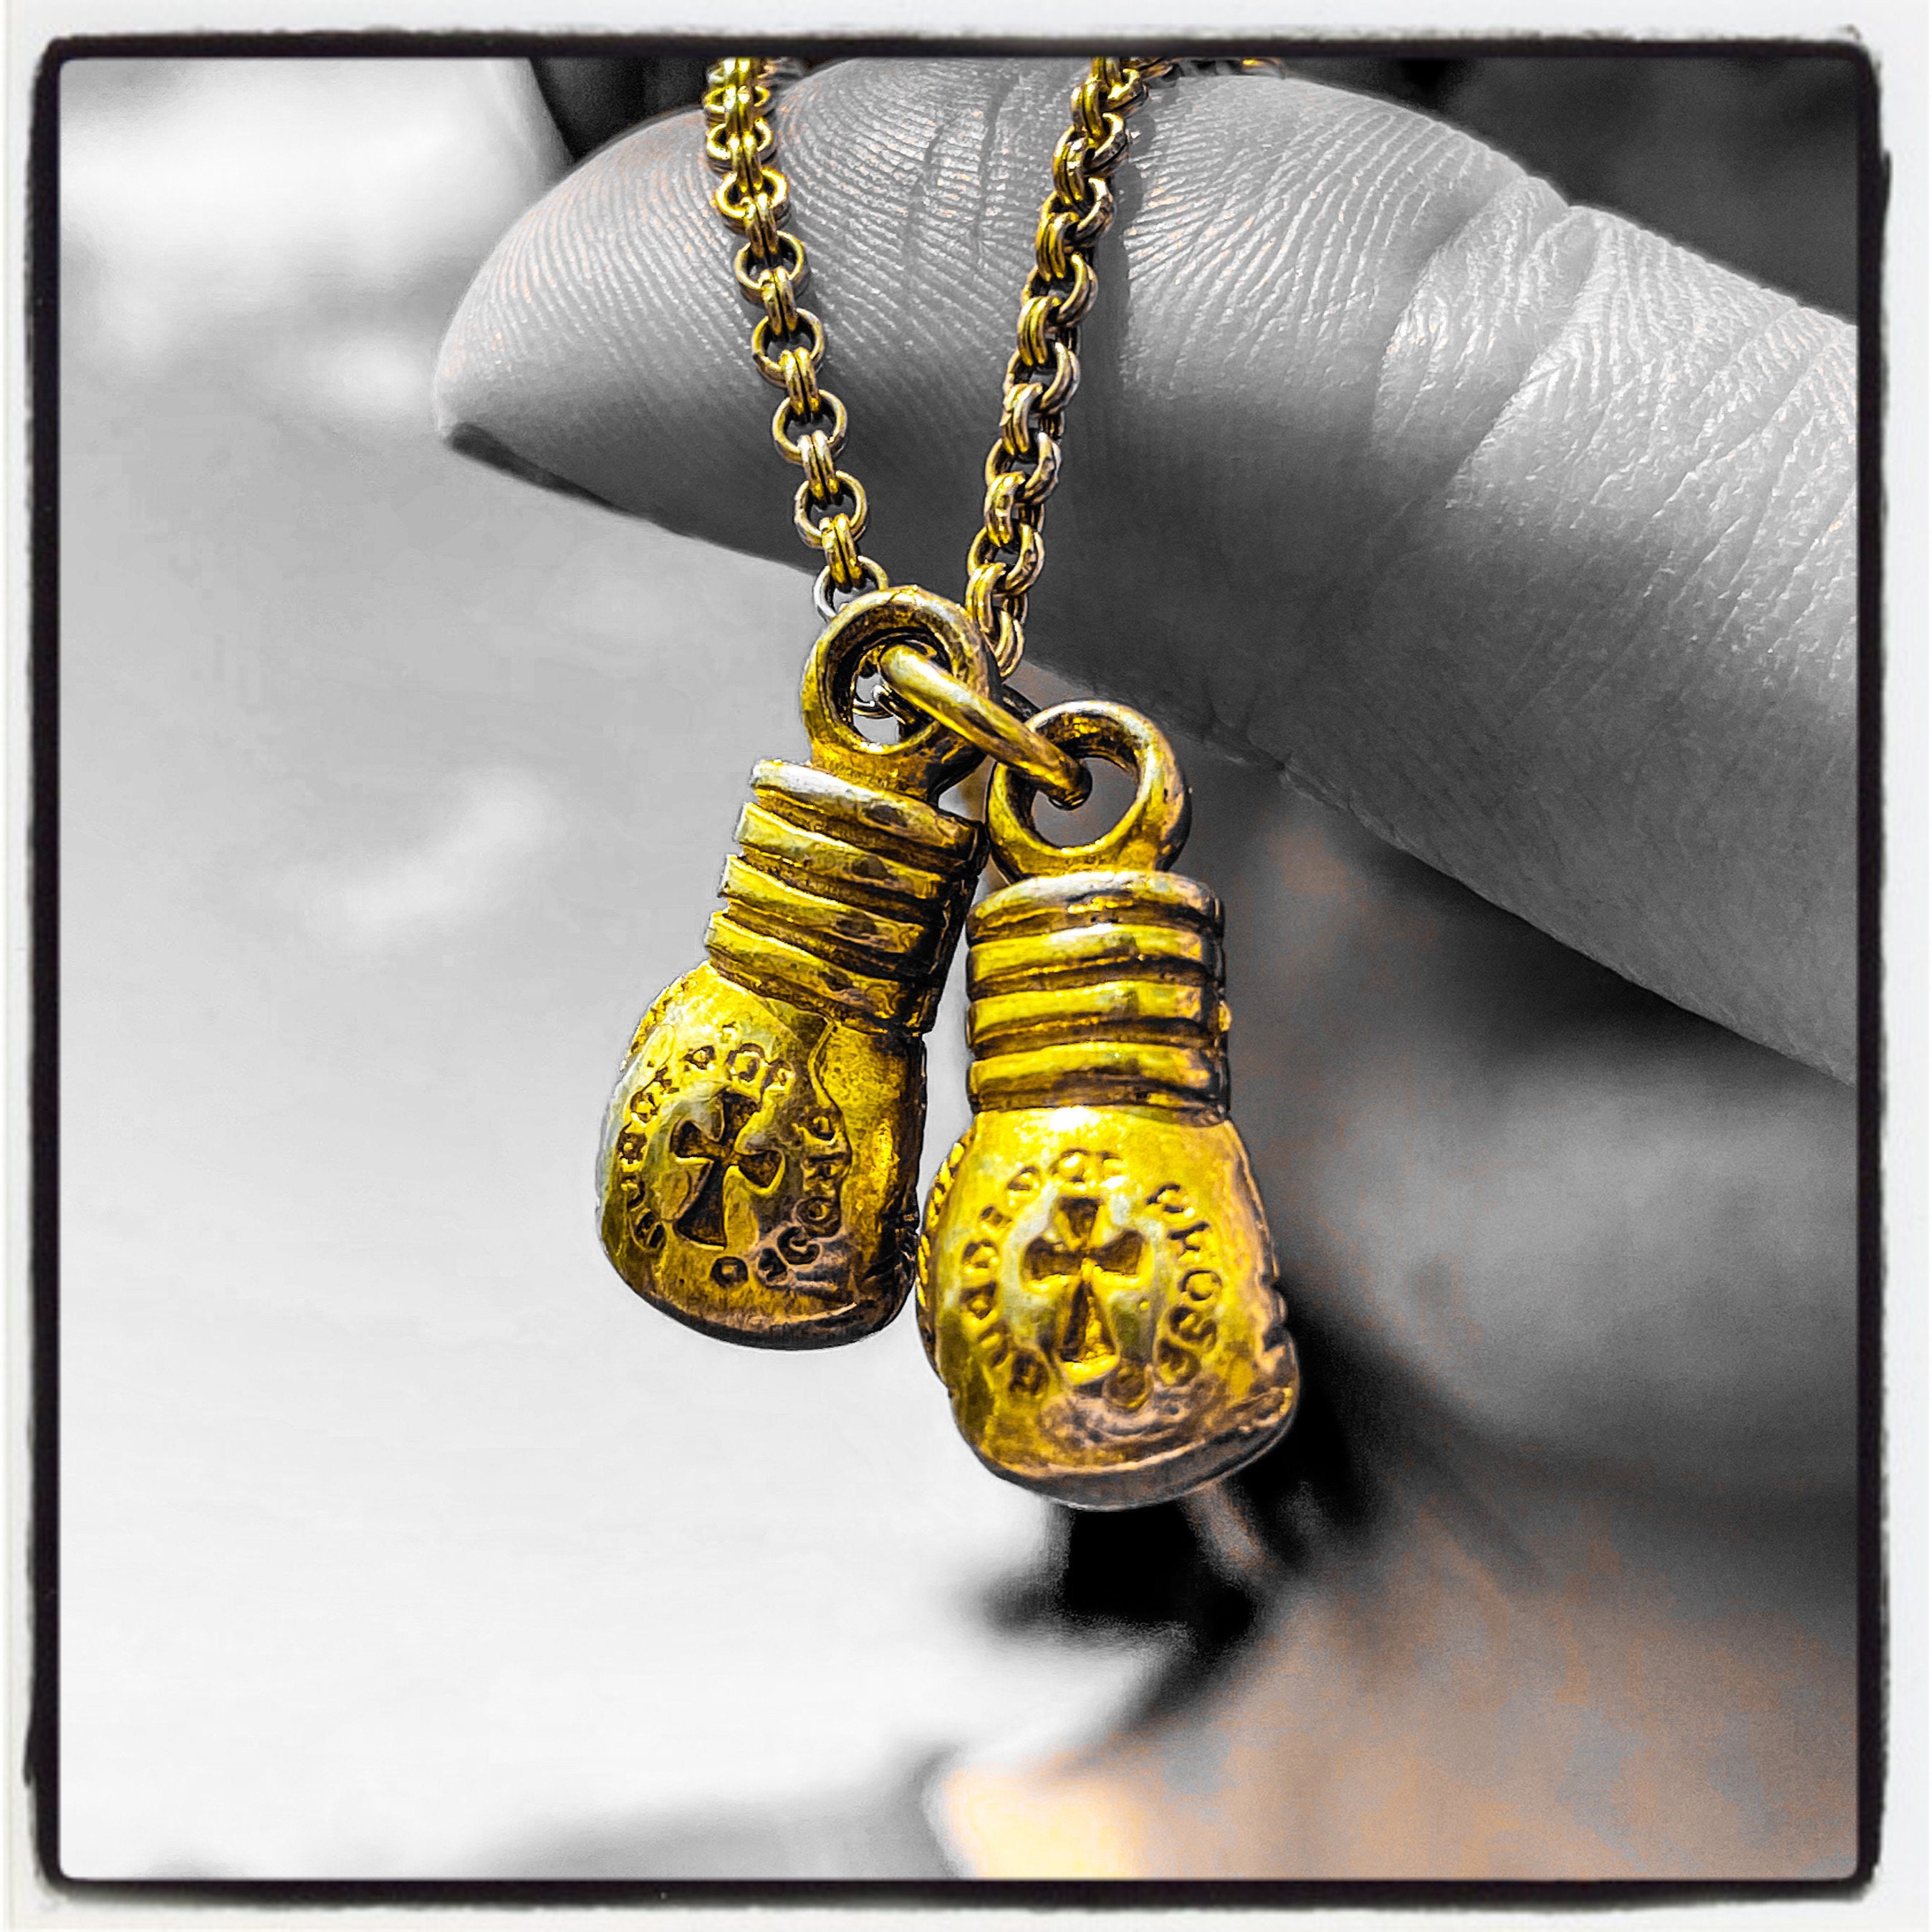 Buy Men's Women's Custom Made Oxidized 925 Sterling Silver or Gold Finish Boxing  Gloves Pendant 2mm Box Chain Necklace 1830 Online in India - Etsy